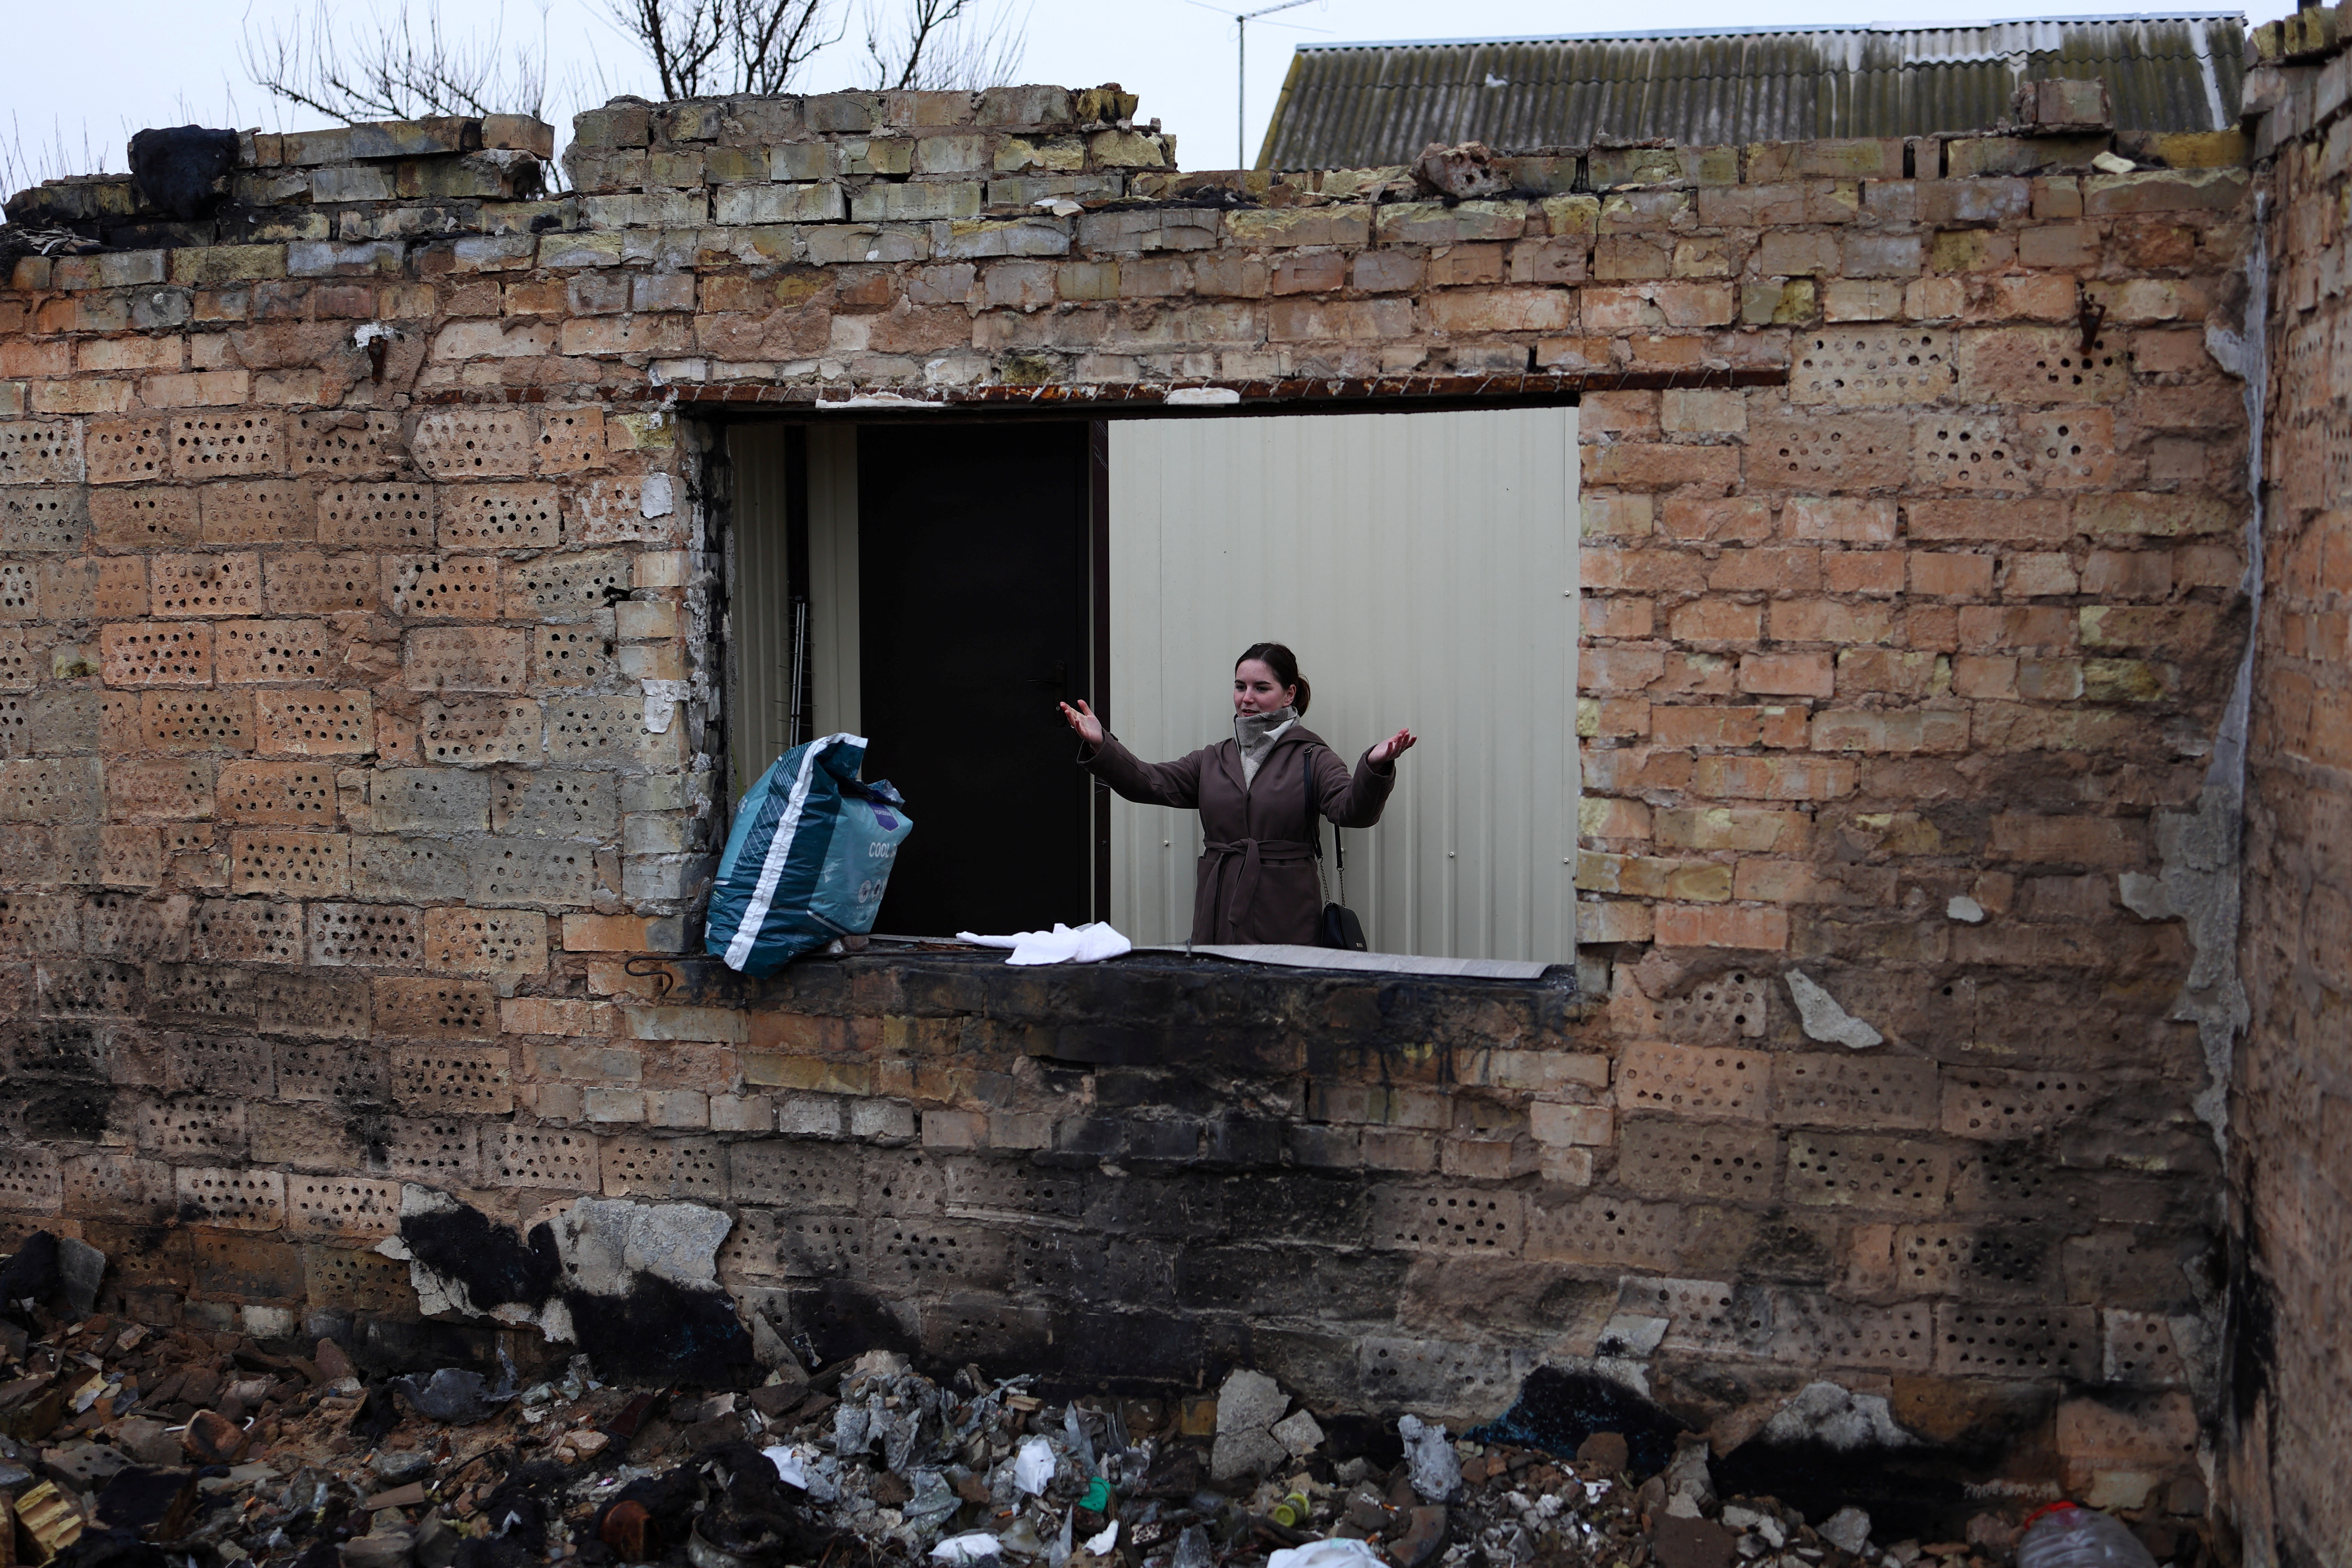 Outages hit family living in the bombed out village near Kyiv